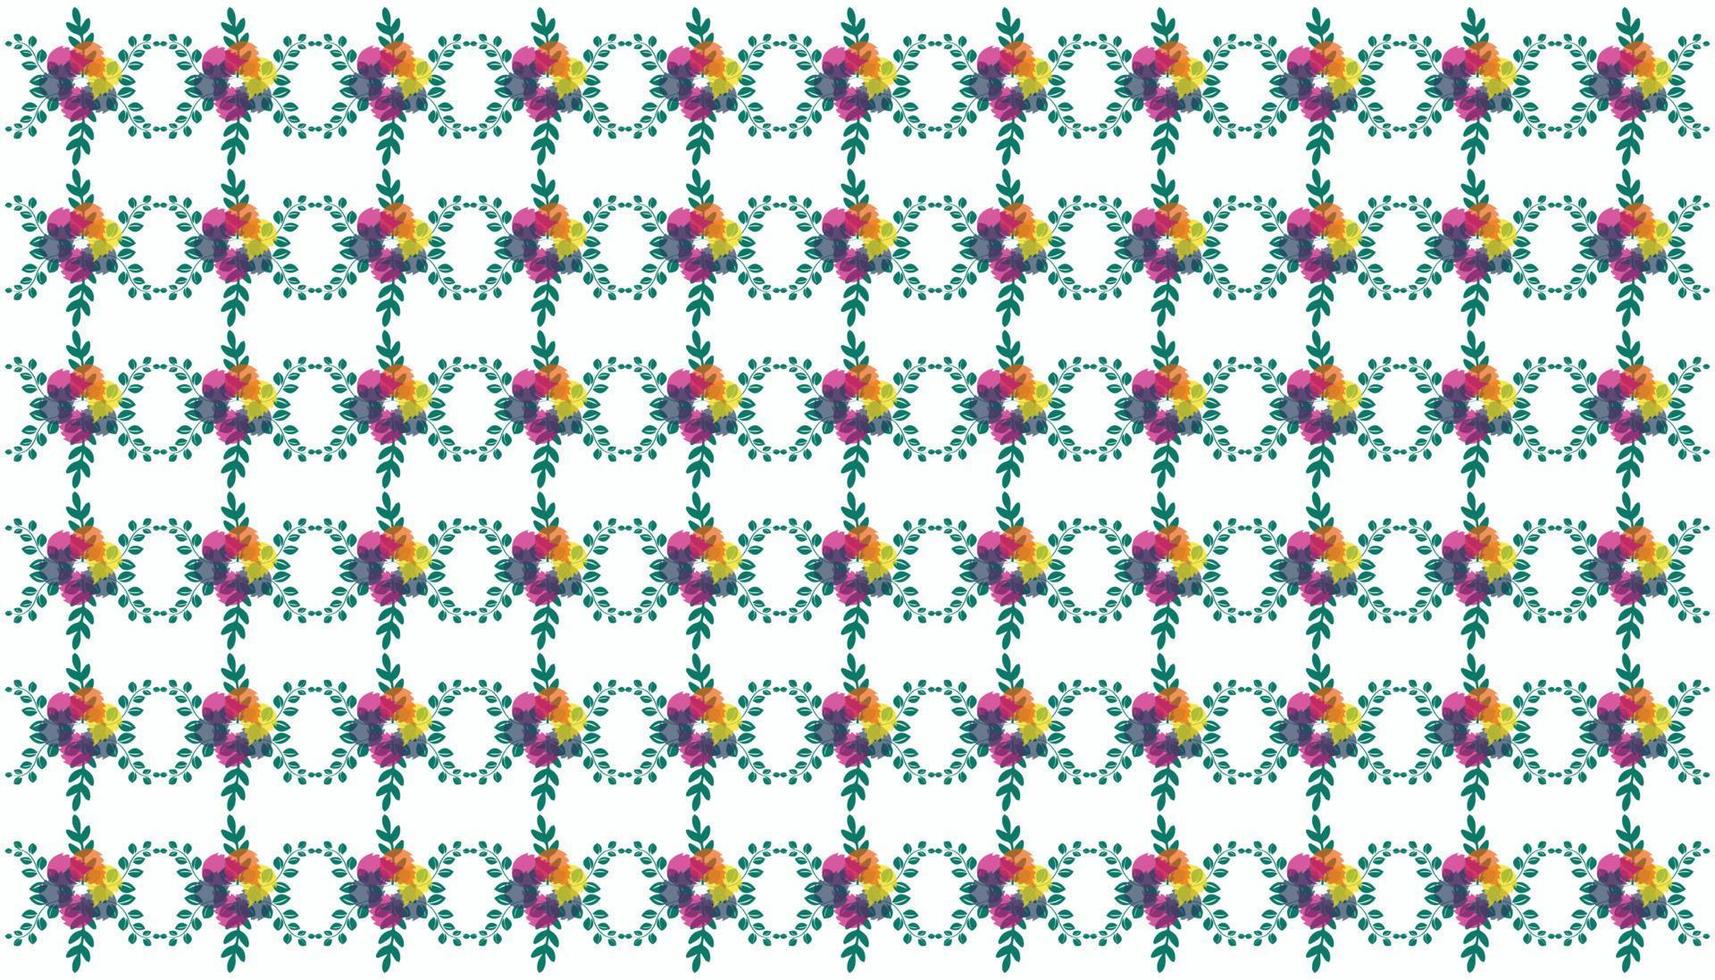 Painted flowers seamless vector background,repeating patterns,repeating patterns floral